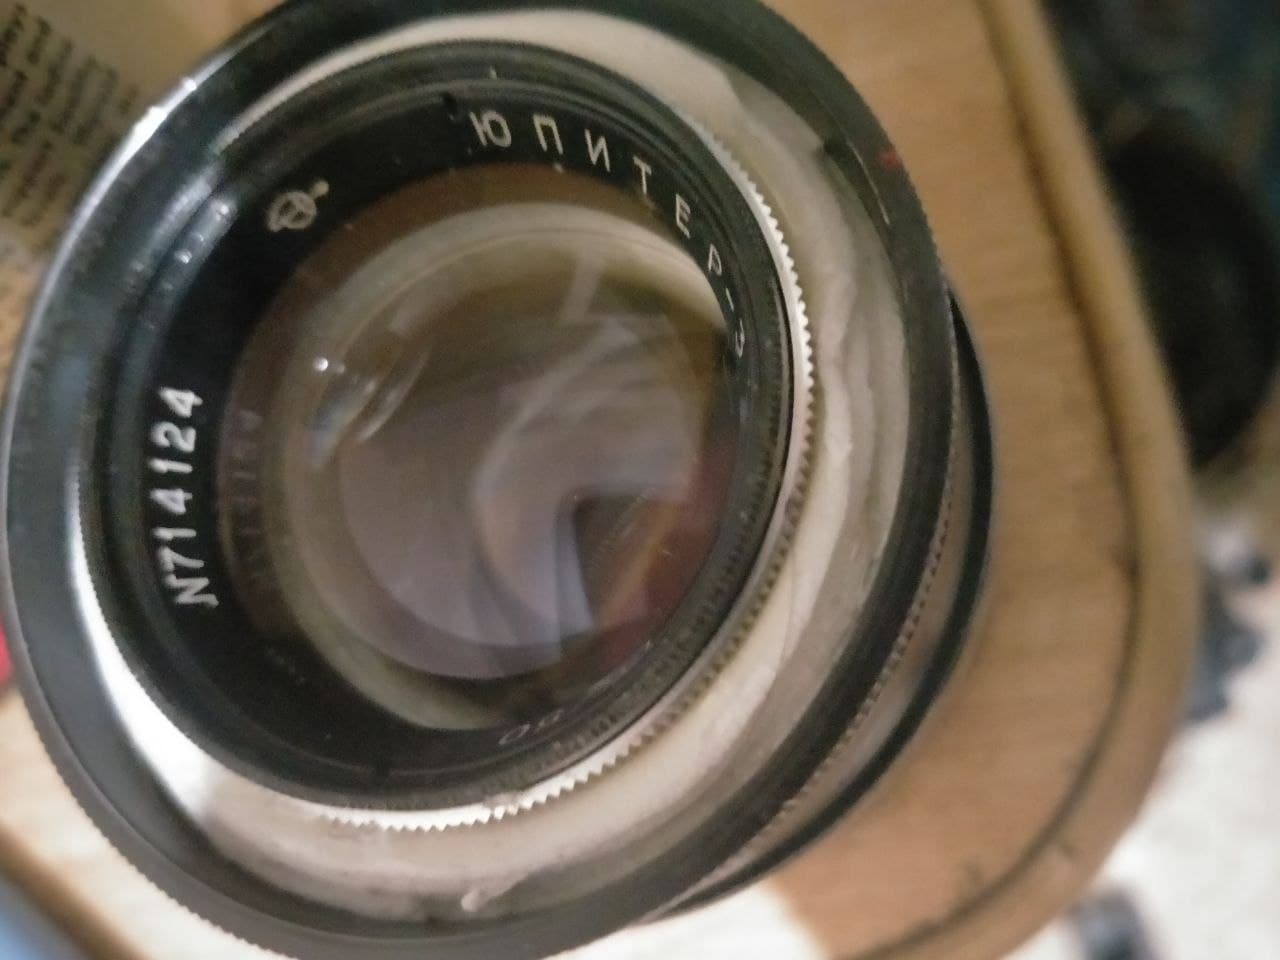 Temporary aperture ring mounting option